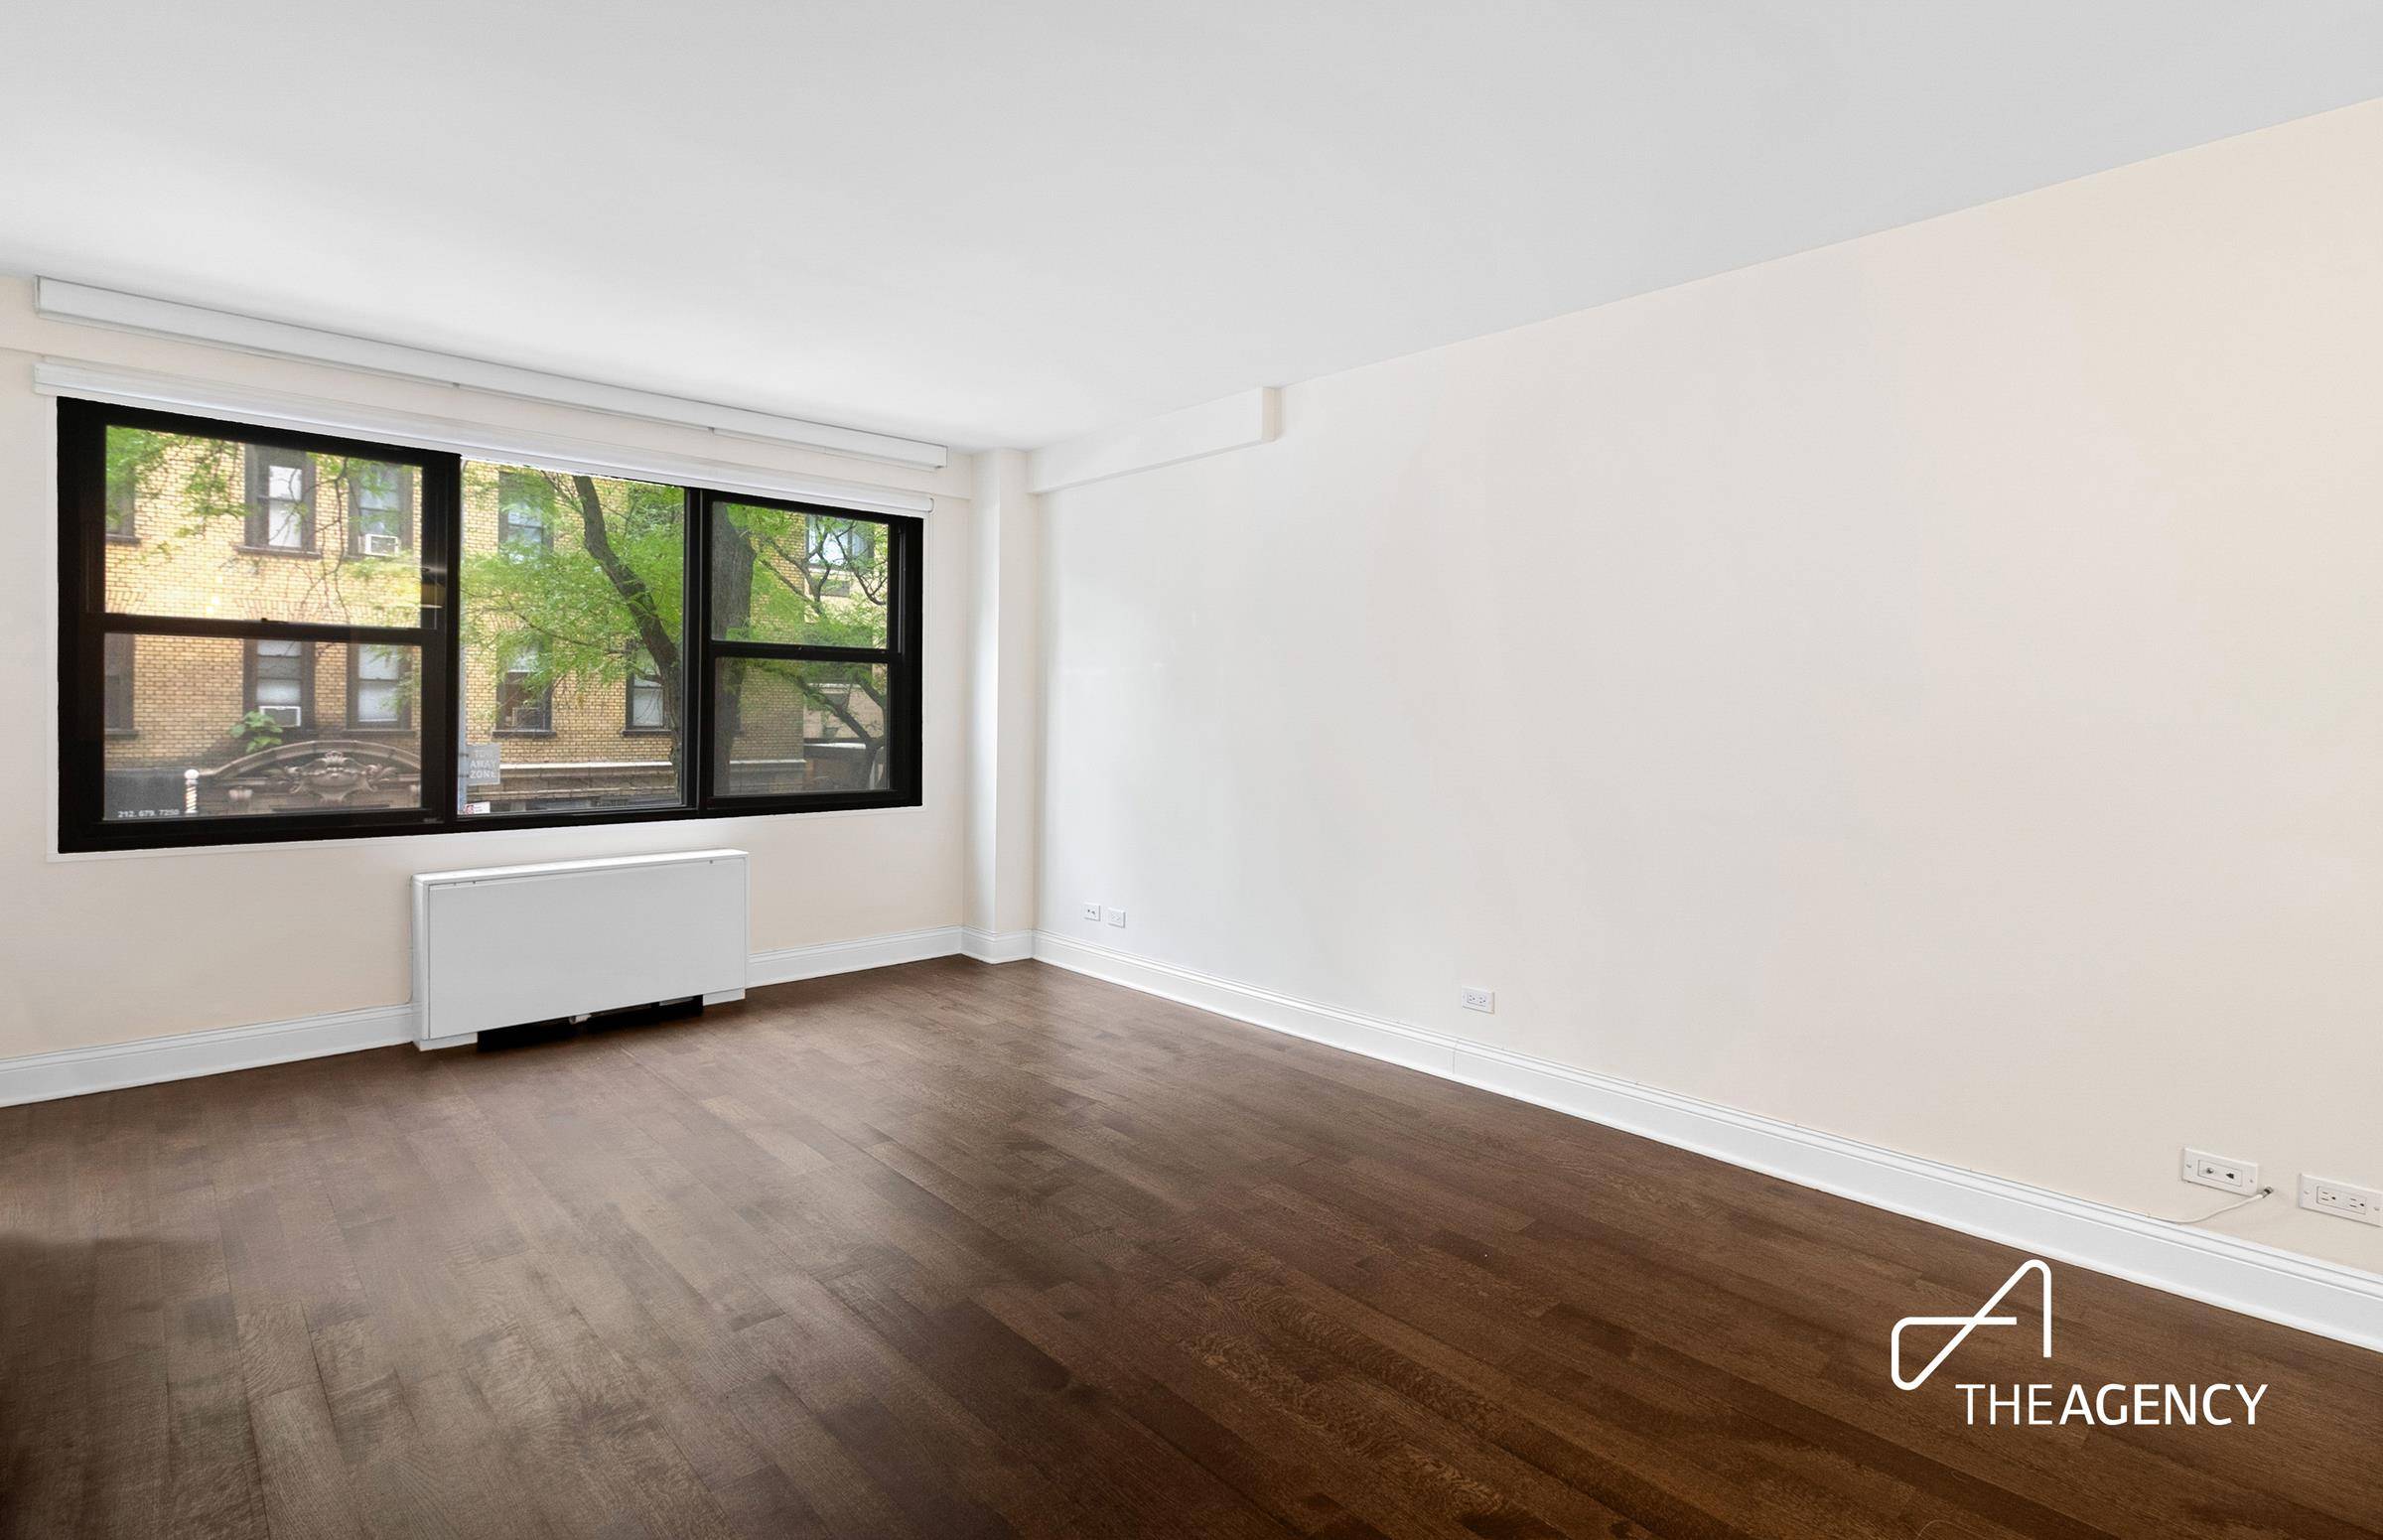 This stunning, renovated, alcove studio on a quiet, tree lined street with soft northern light, features oak flooring, two large closet spaces, complete with an updated bathroom and kitchen that ...